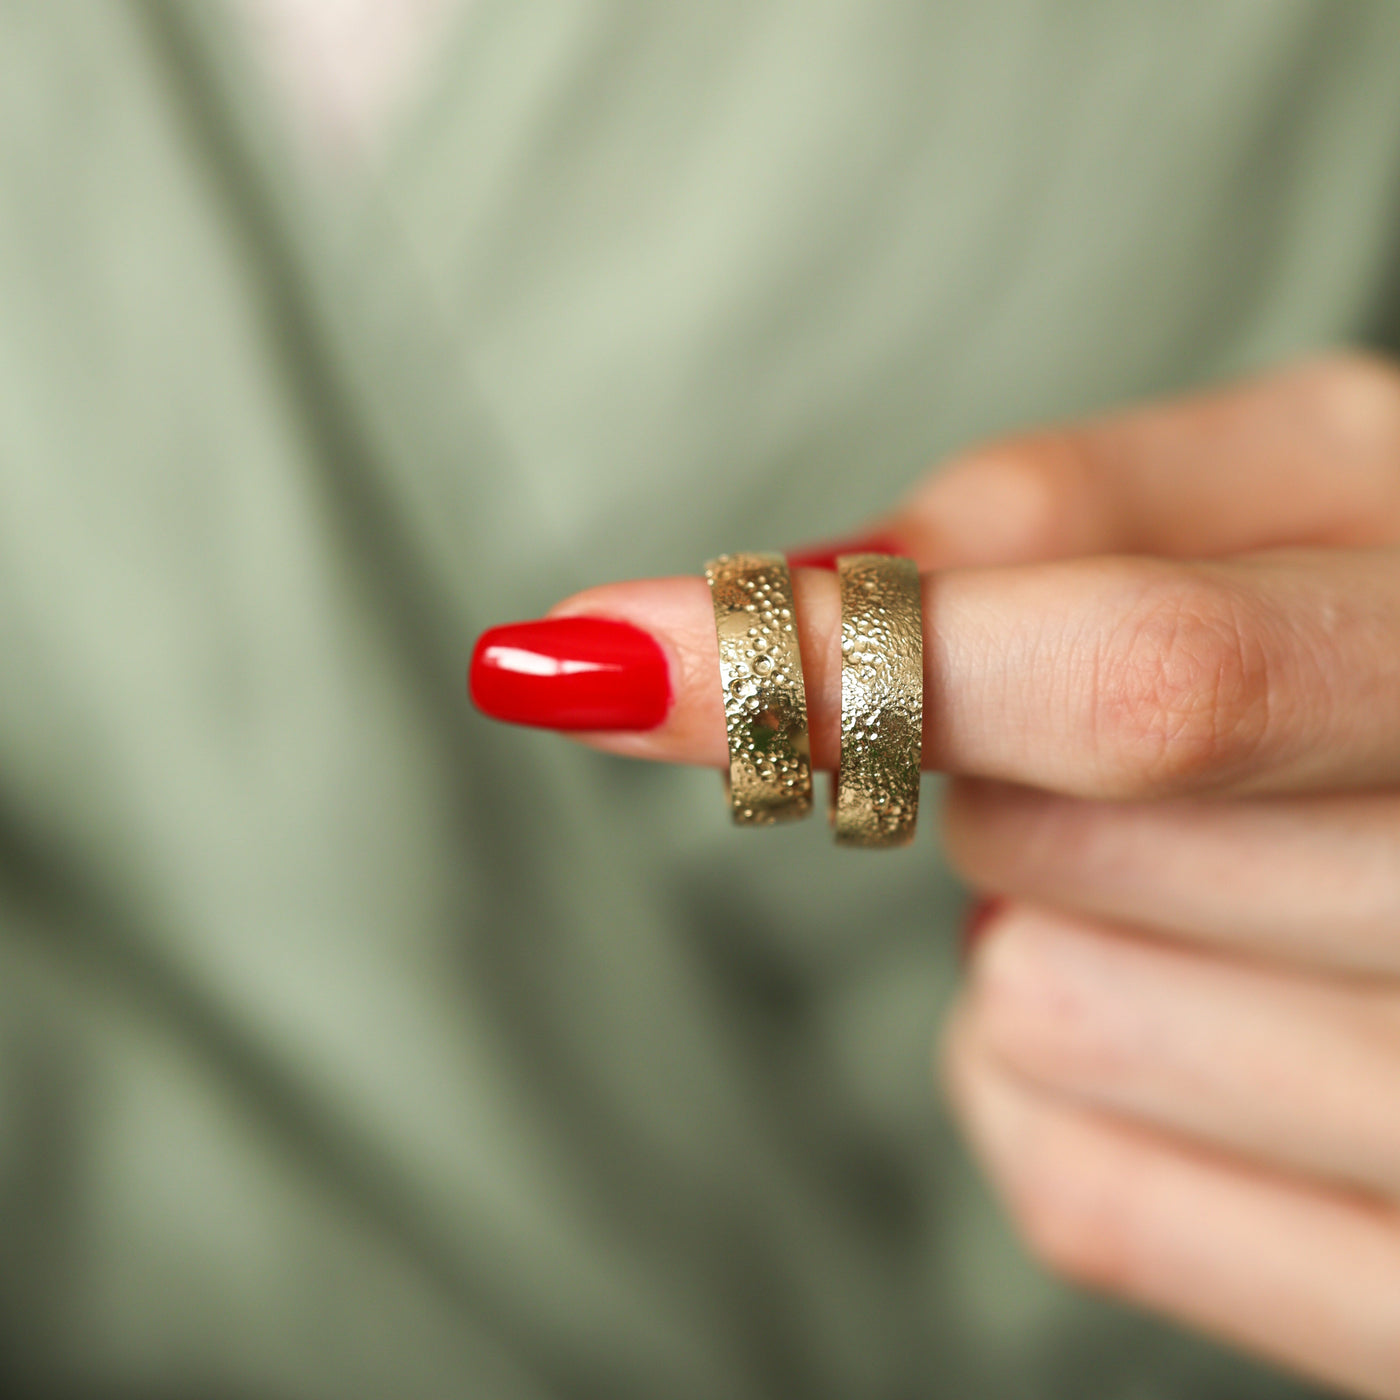 Textured gold wedding band on a finger with red nails and gold rings. Unisex twist design in 14k and 18k gold.